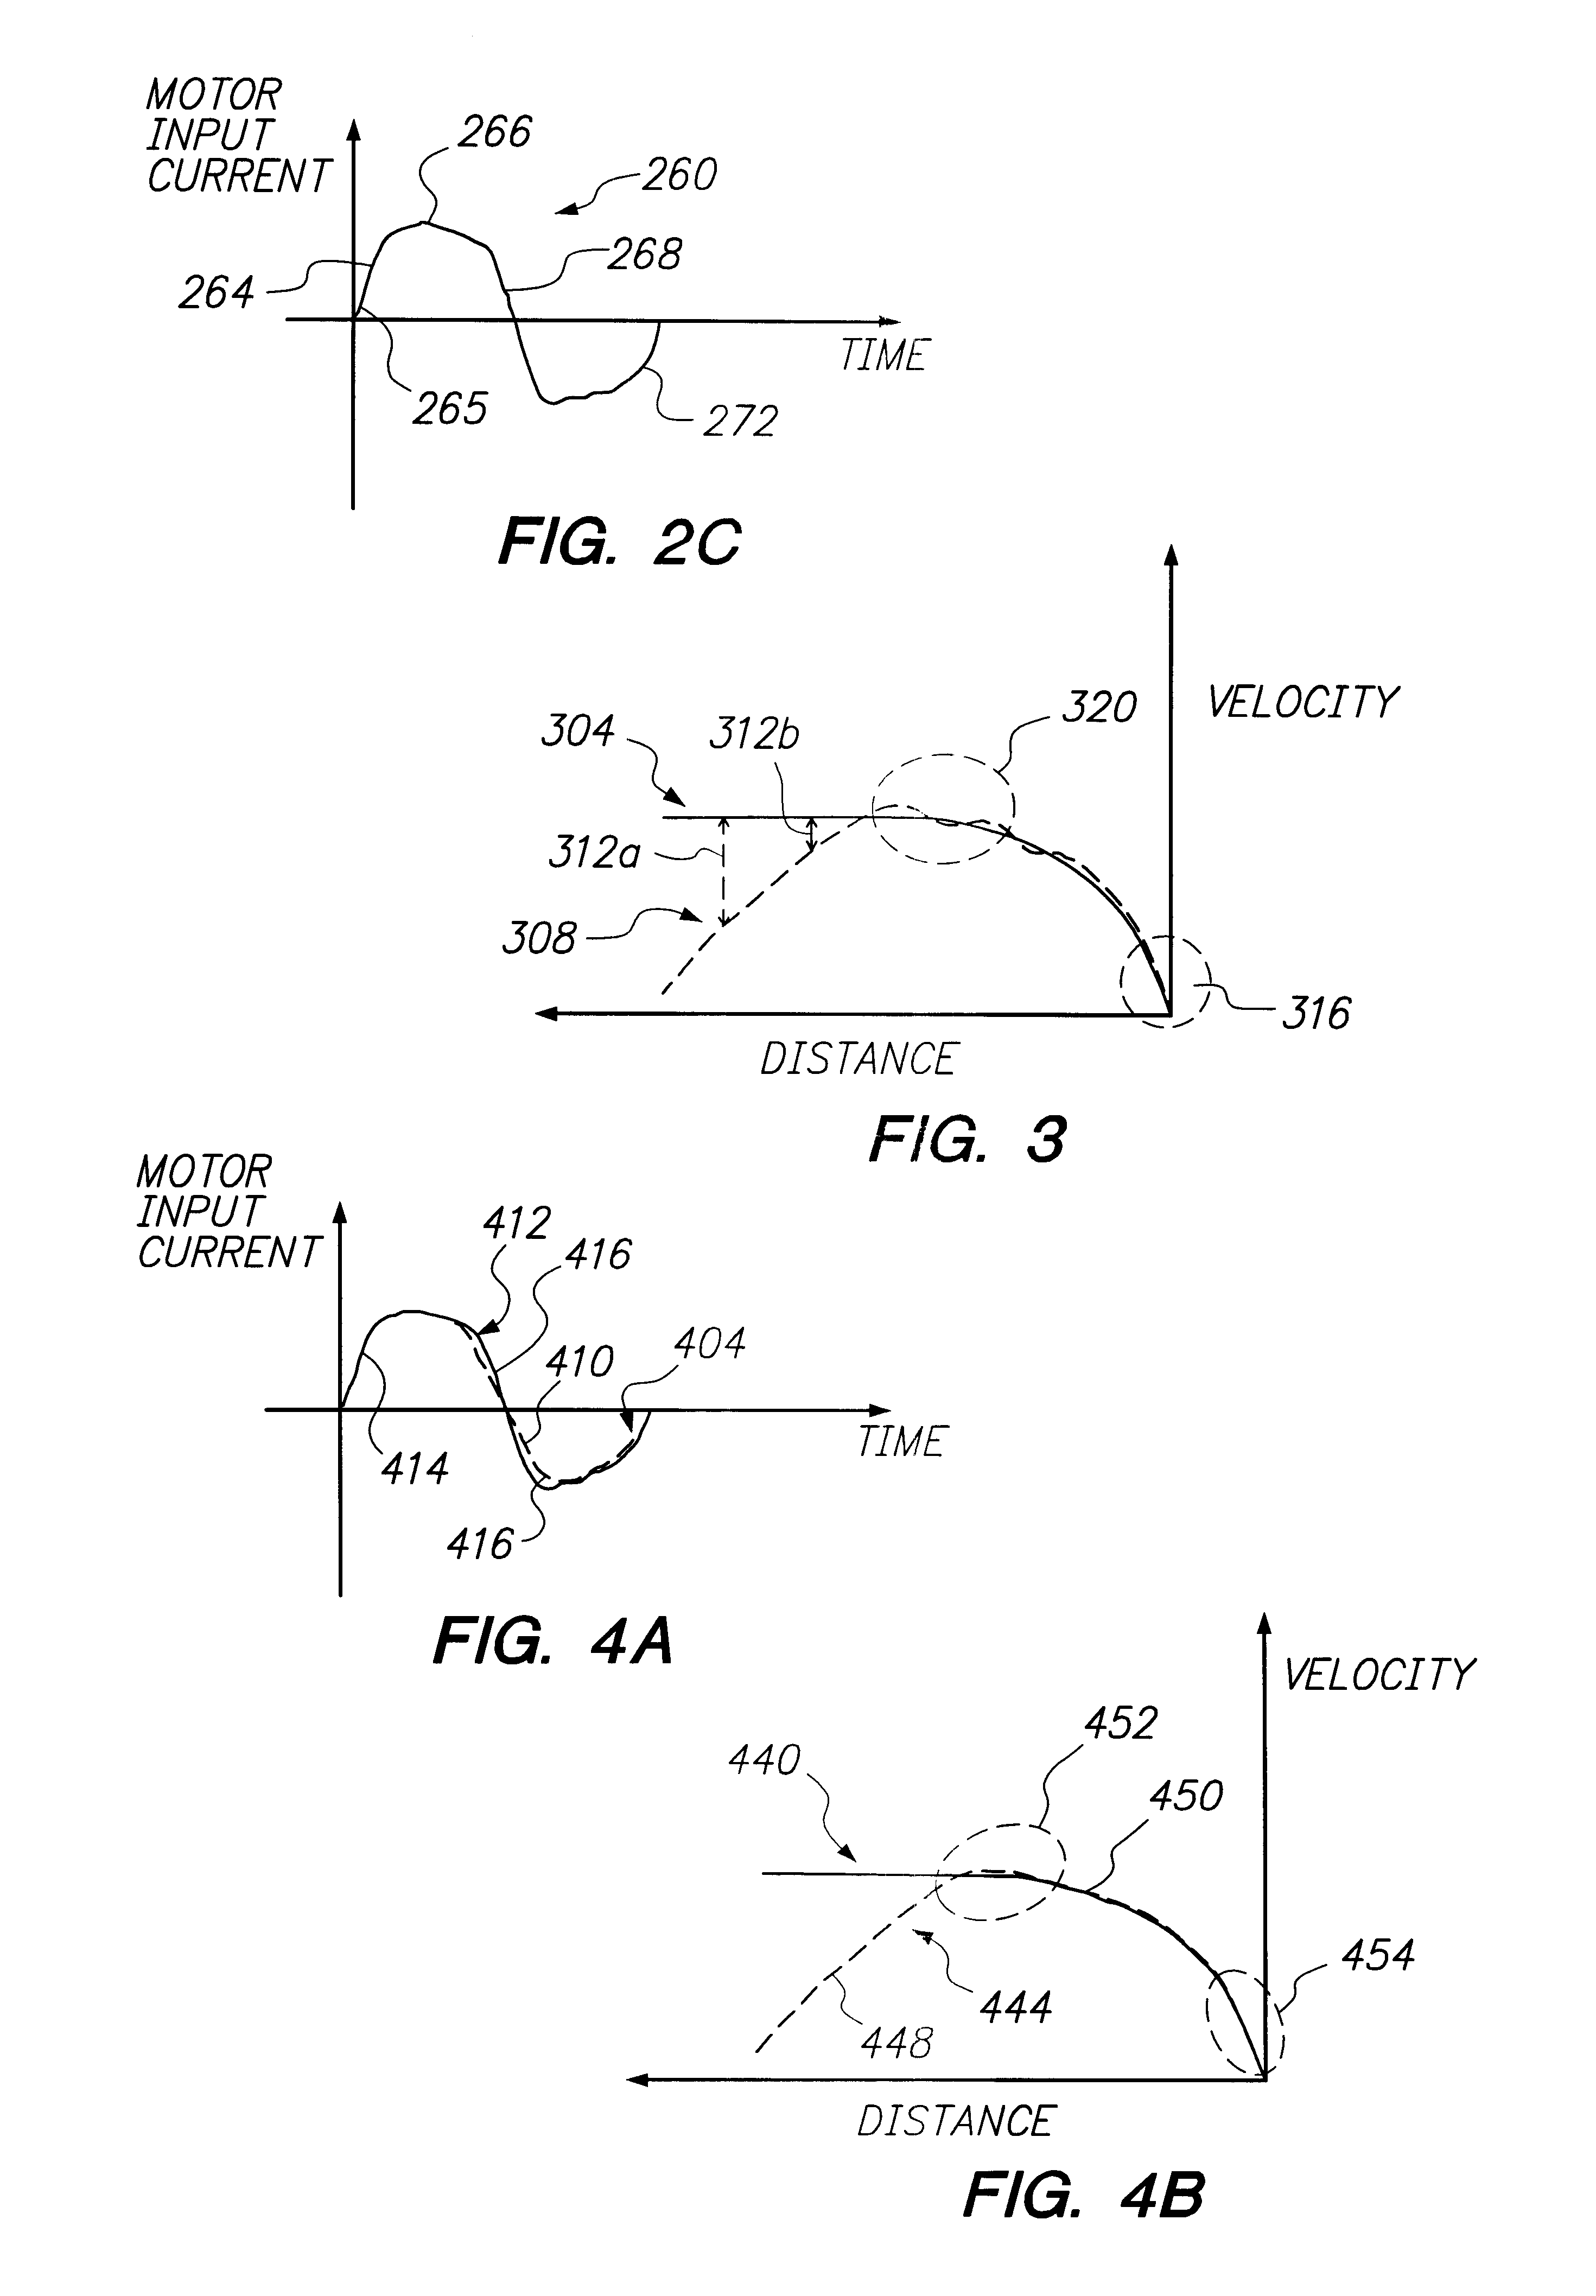 Method and apparatus for performing current shaping for seeking acoustics reduction in a disk drive